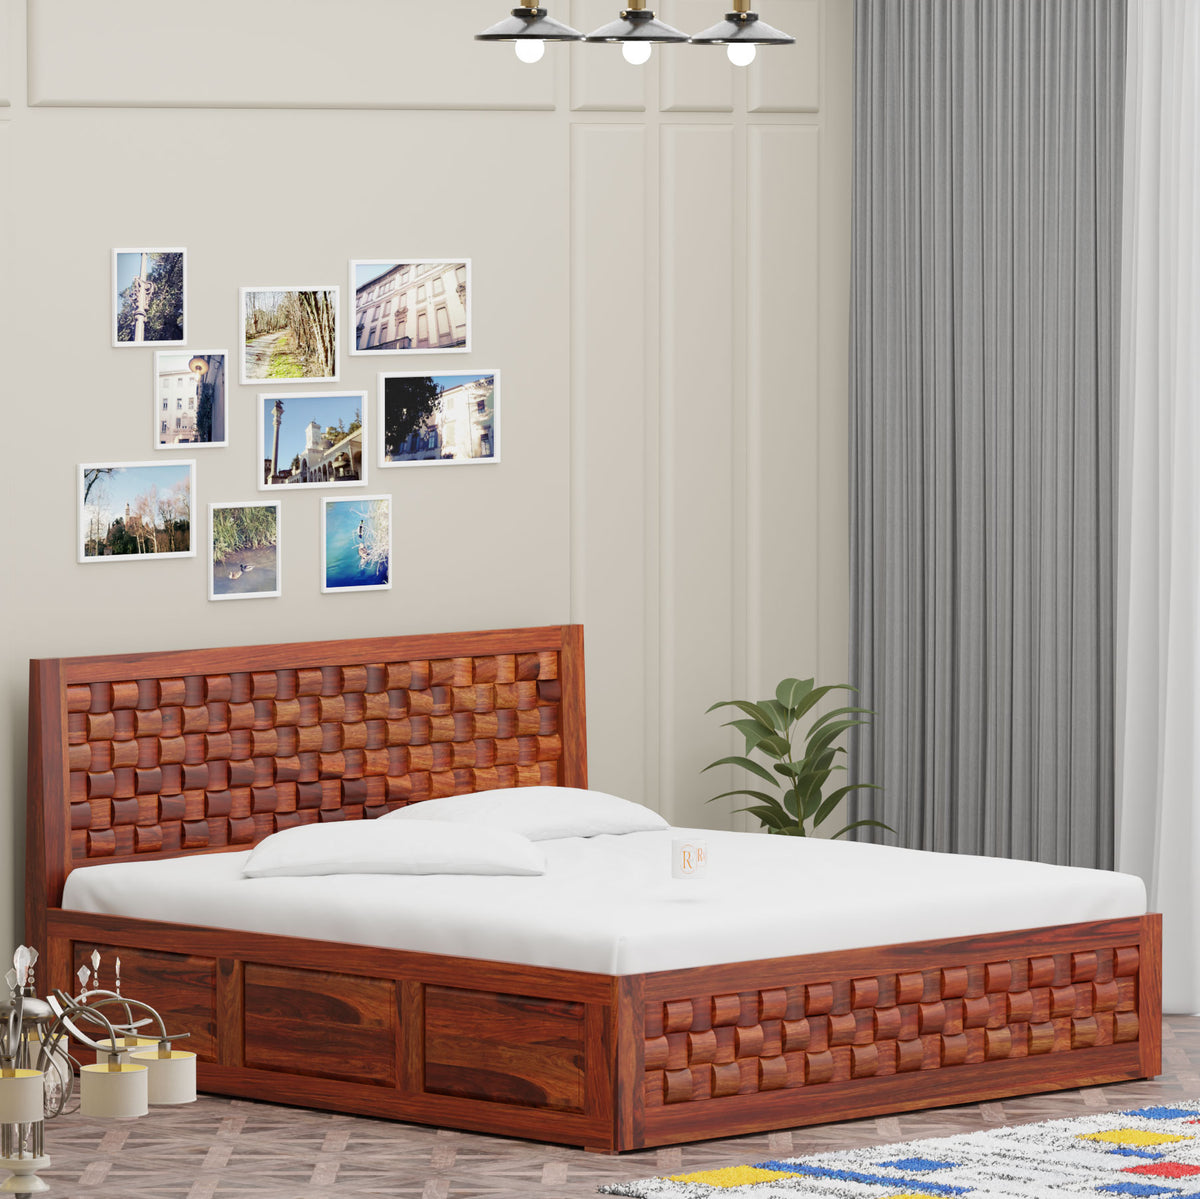 Wout Solid Wood Double Bed with Box Storage in Honey Oak Finish